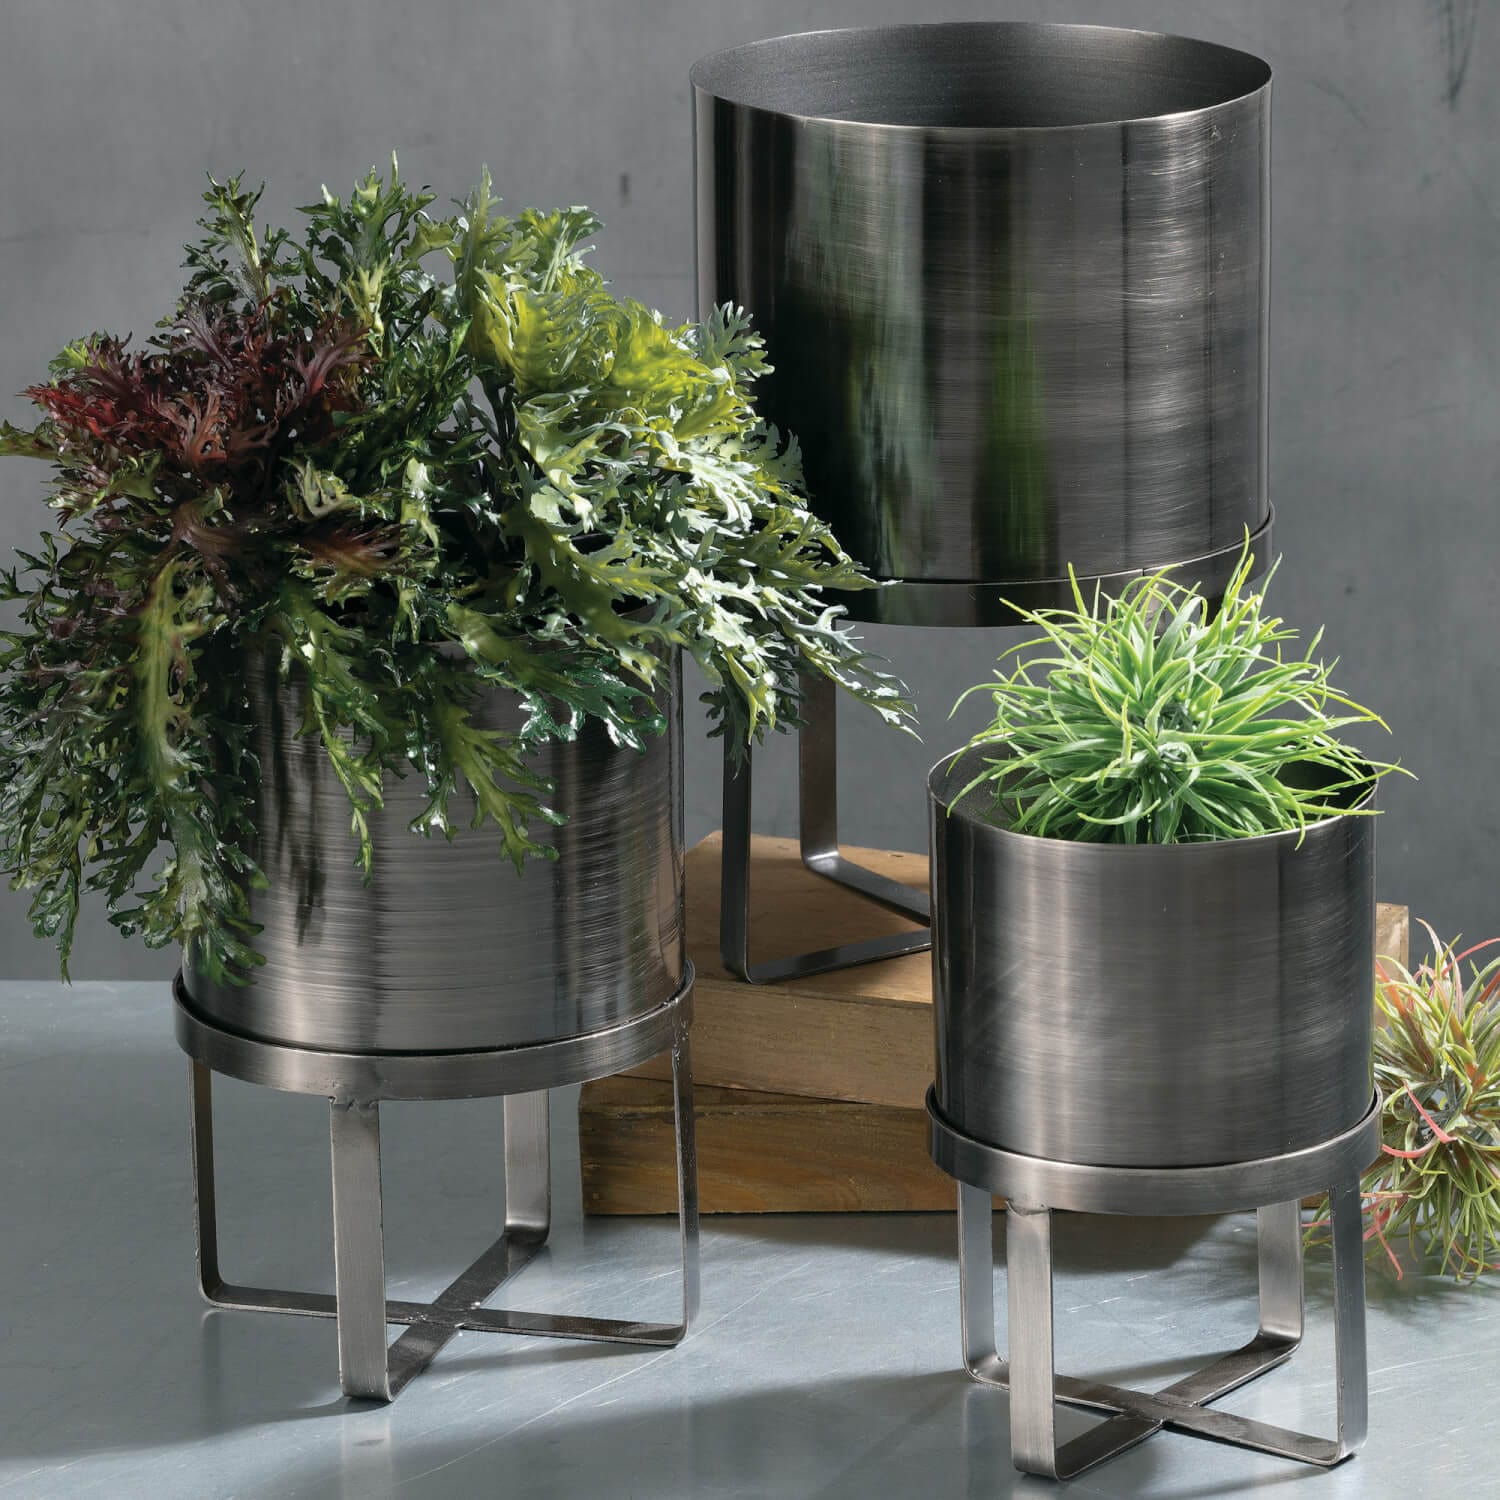 Metal Planter With Stand Trio Elevate Home Decor - Pots & Planters